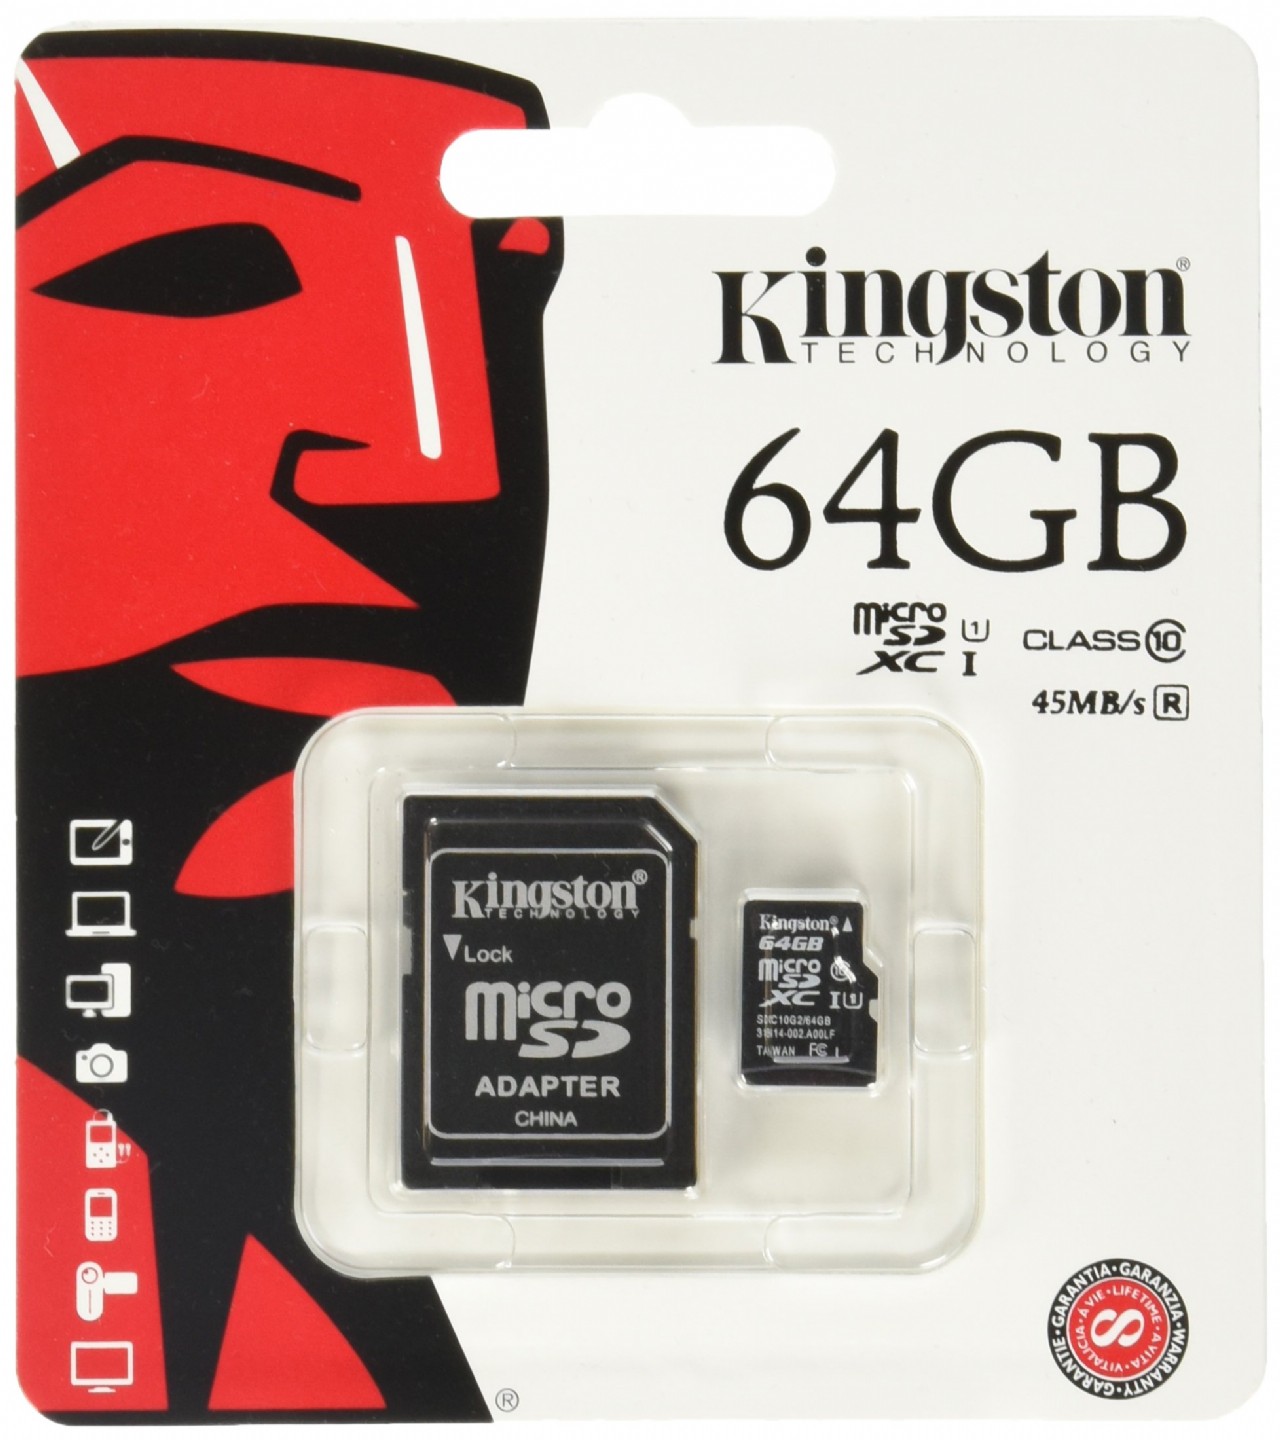 Kingston Digital 64 GB microSD Class 10 UHS-1 Memory Card 30MB/s with Adapter (SDCX10/64GB)